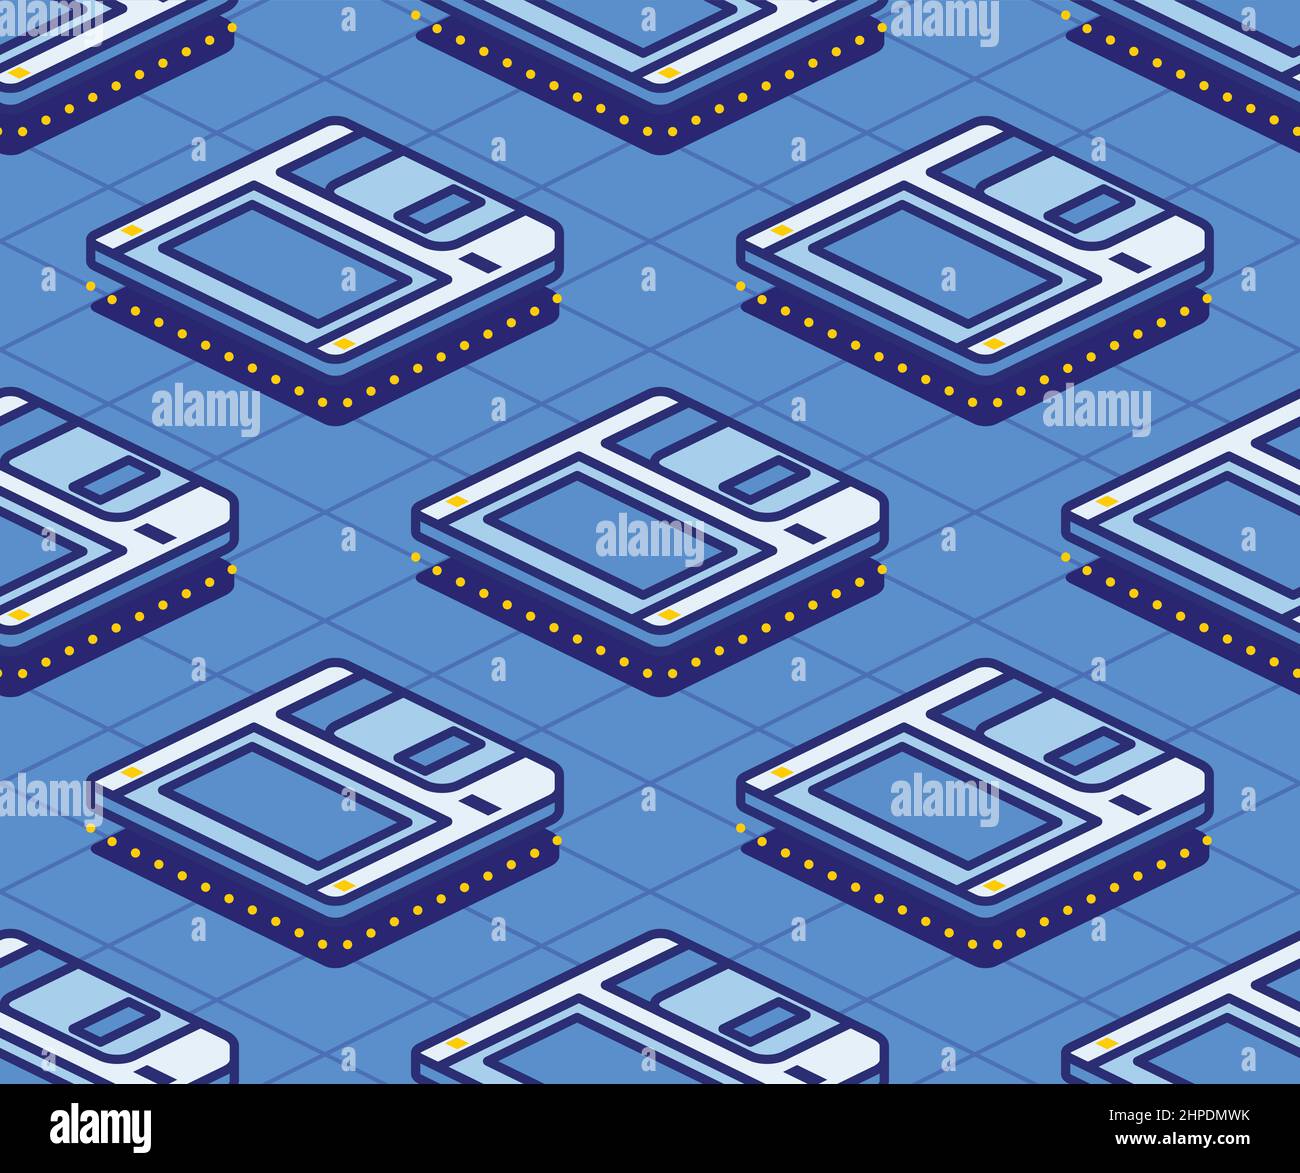 Isometric Floppy Magnetic Disk Seamless Pattern. Vector Illustration. Diskette on Blue Background. Retro Electronic Storage Device. Concept 80s and 90 Stock Vector